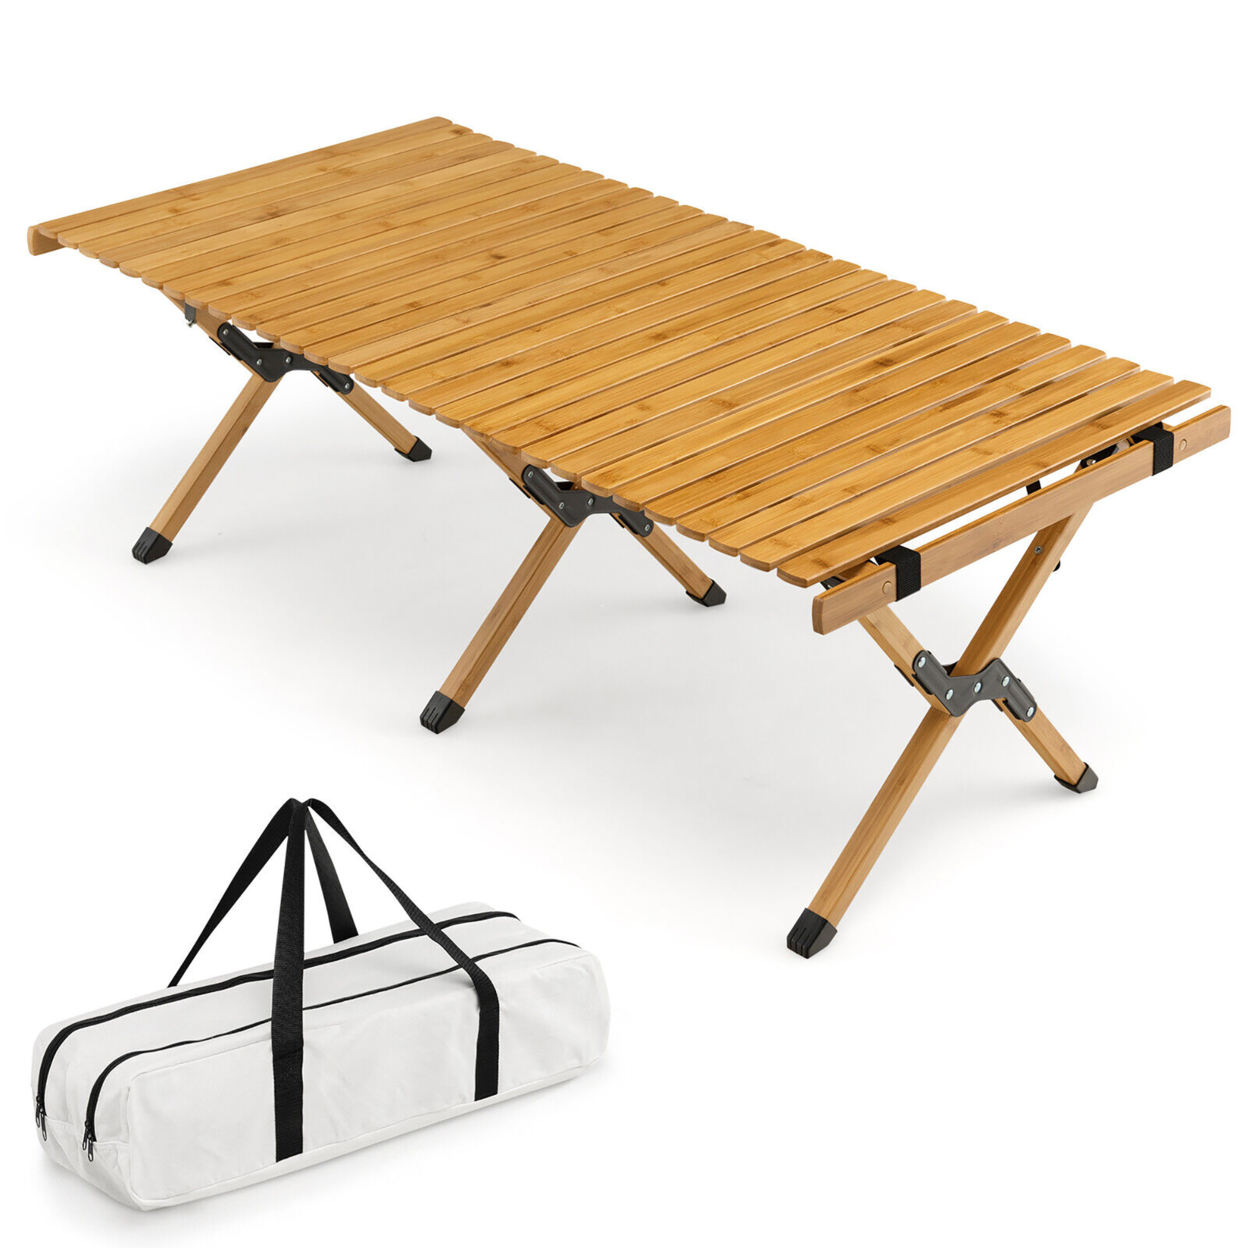 Portable Folding Bamboo Camping Table W/ Carry Bag Outdoor & Indoor - Natural